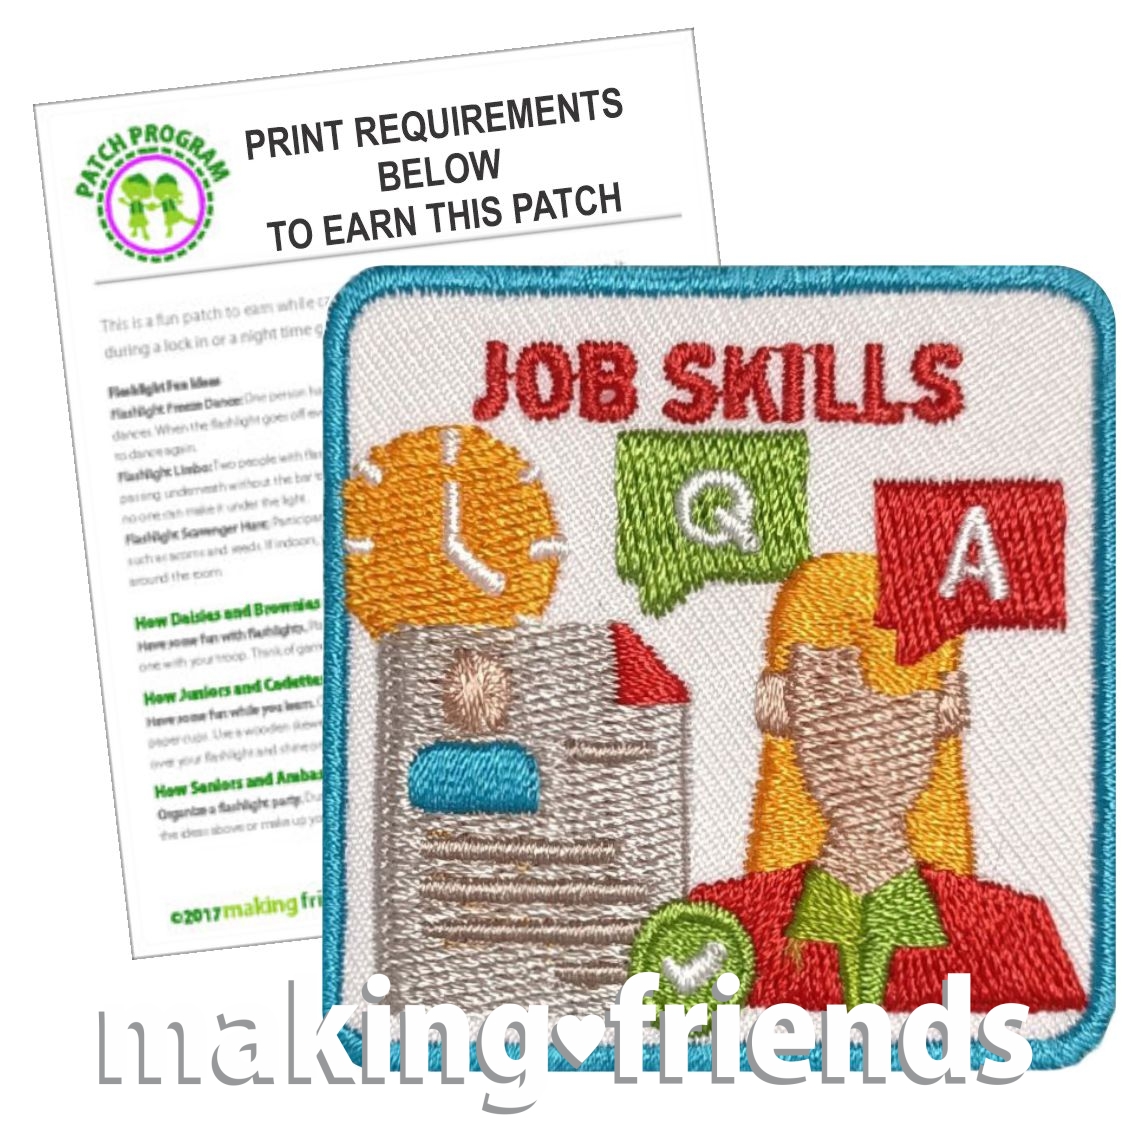 Girl Scout Adulting Patch Program® Job Skills